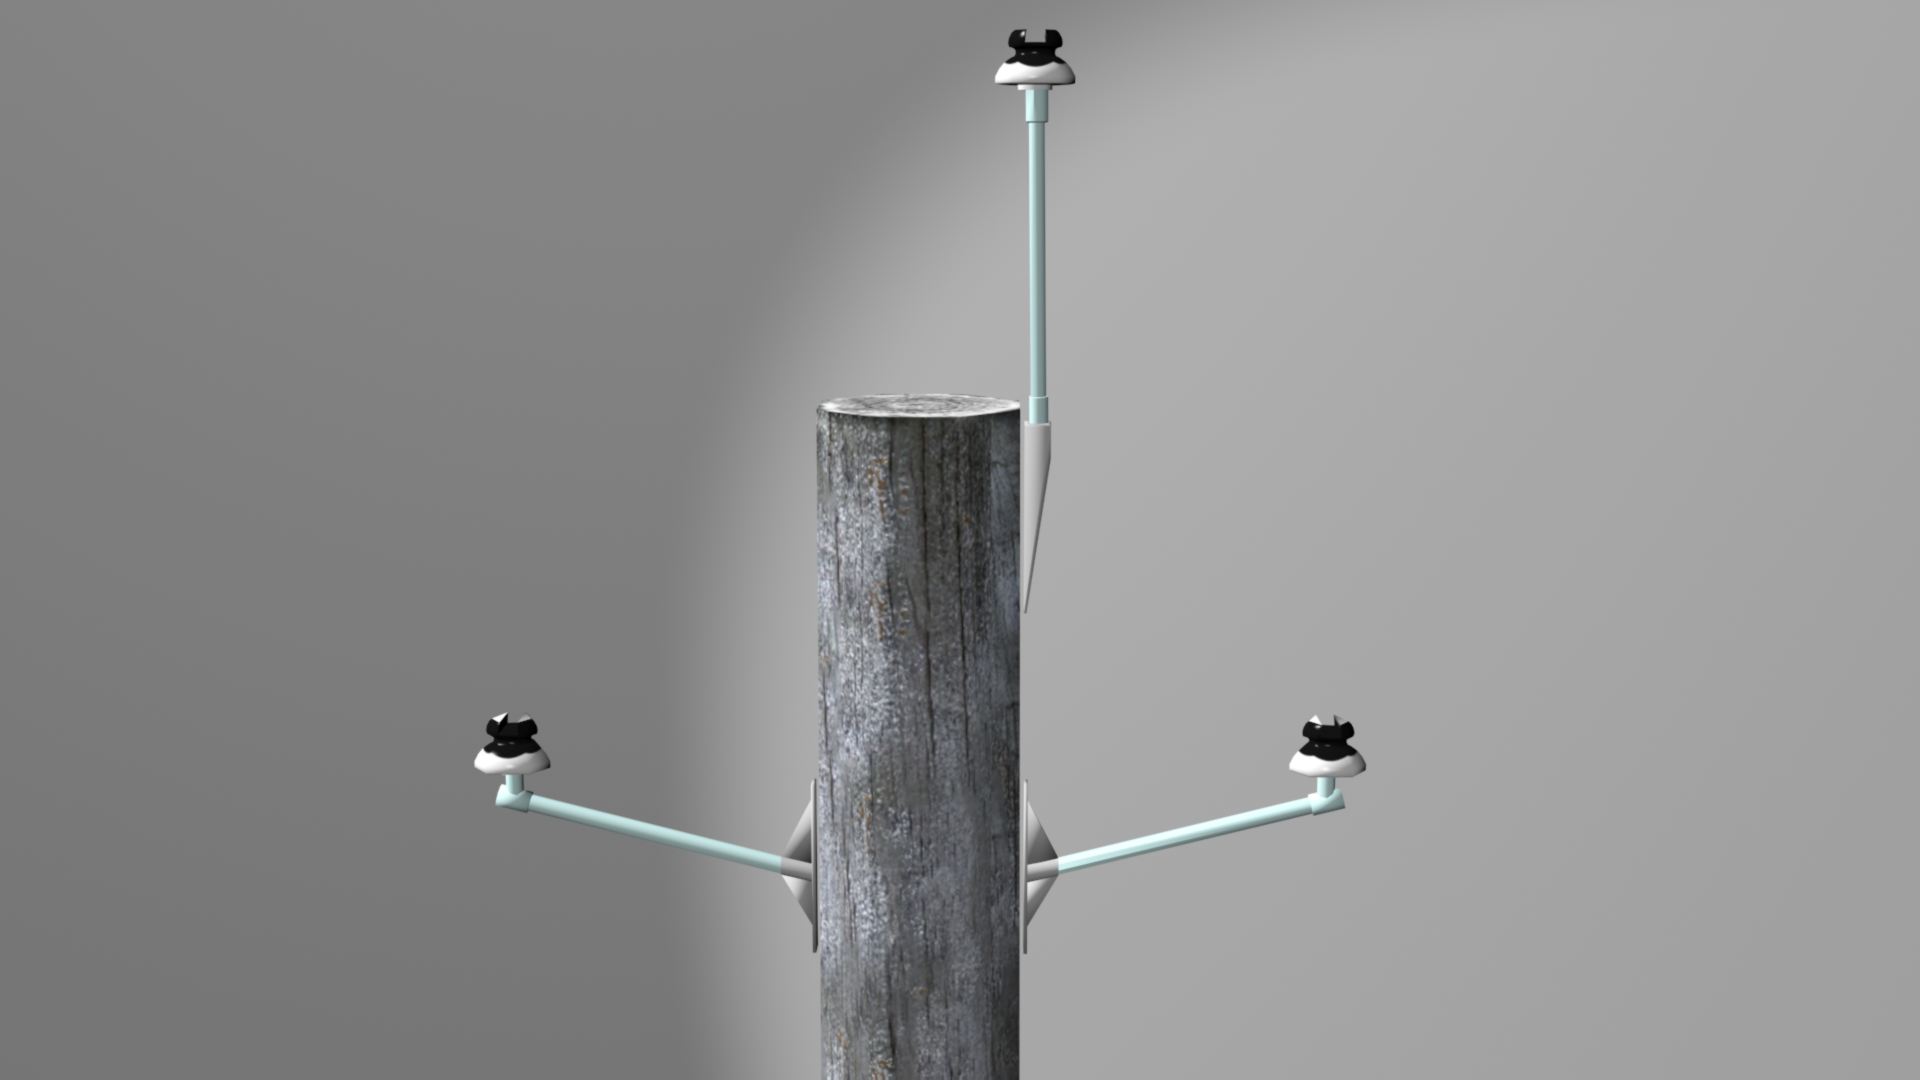 Wooden Electric Pole LOD 2